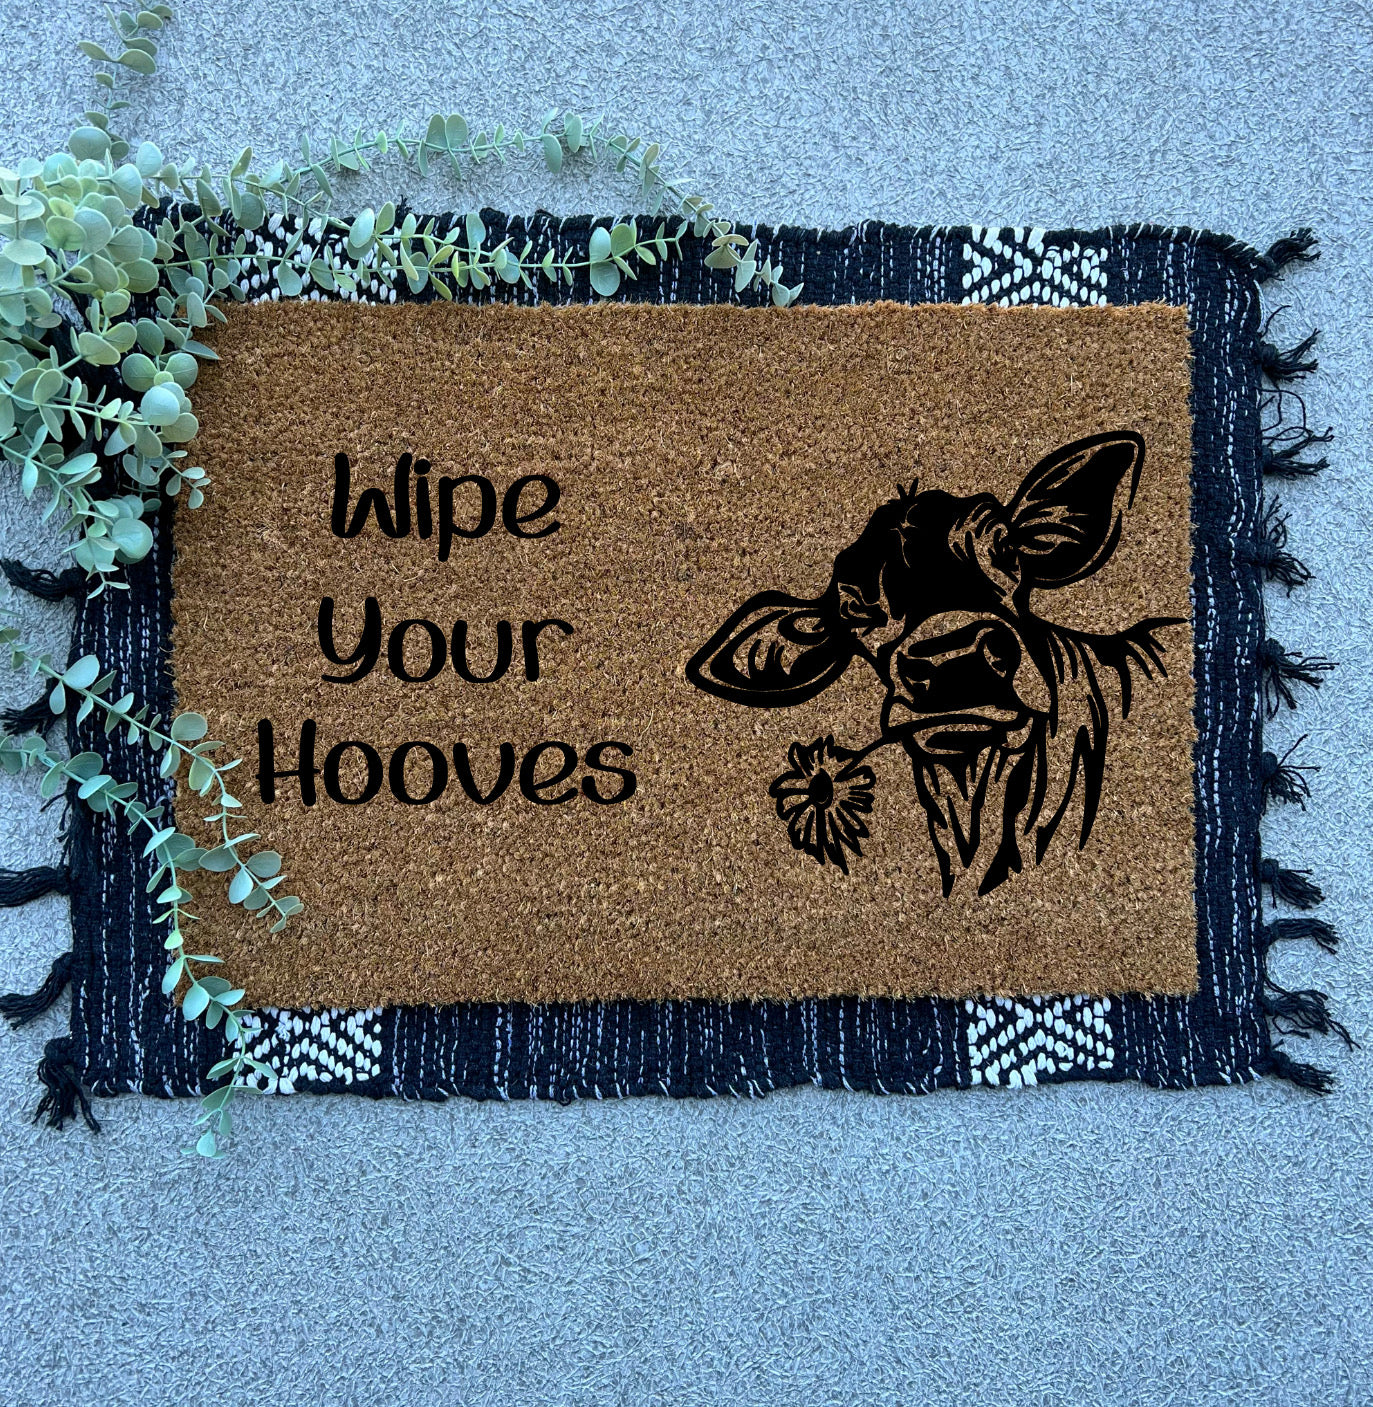 Wipe Your Hooves